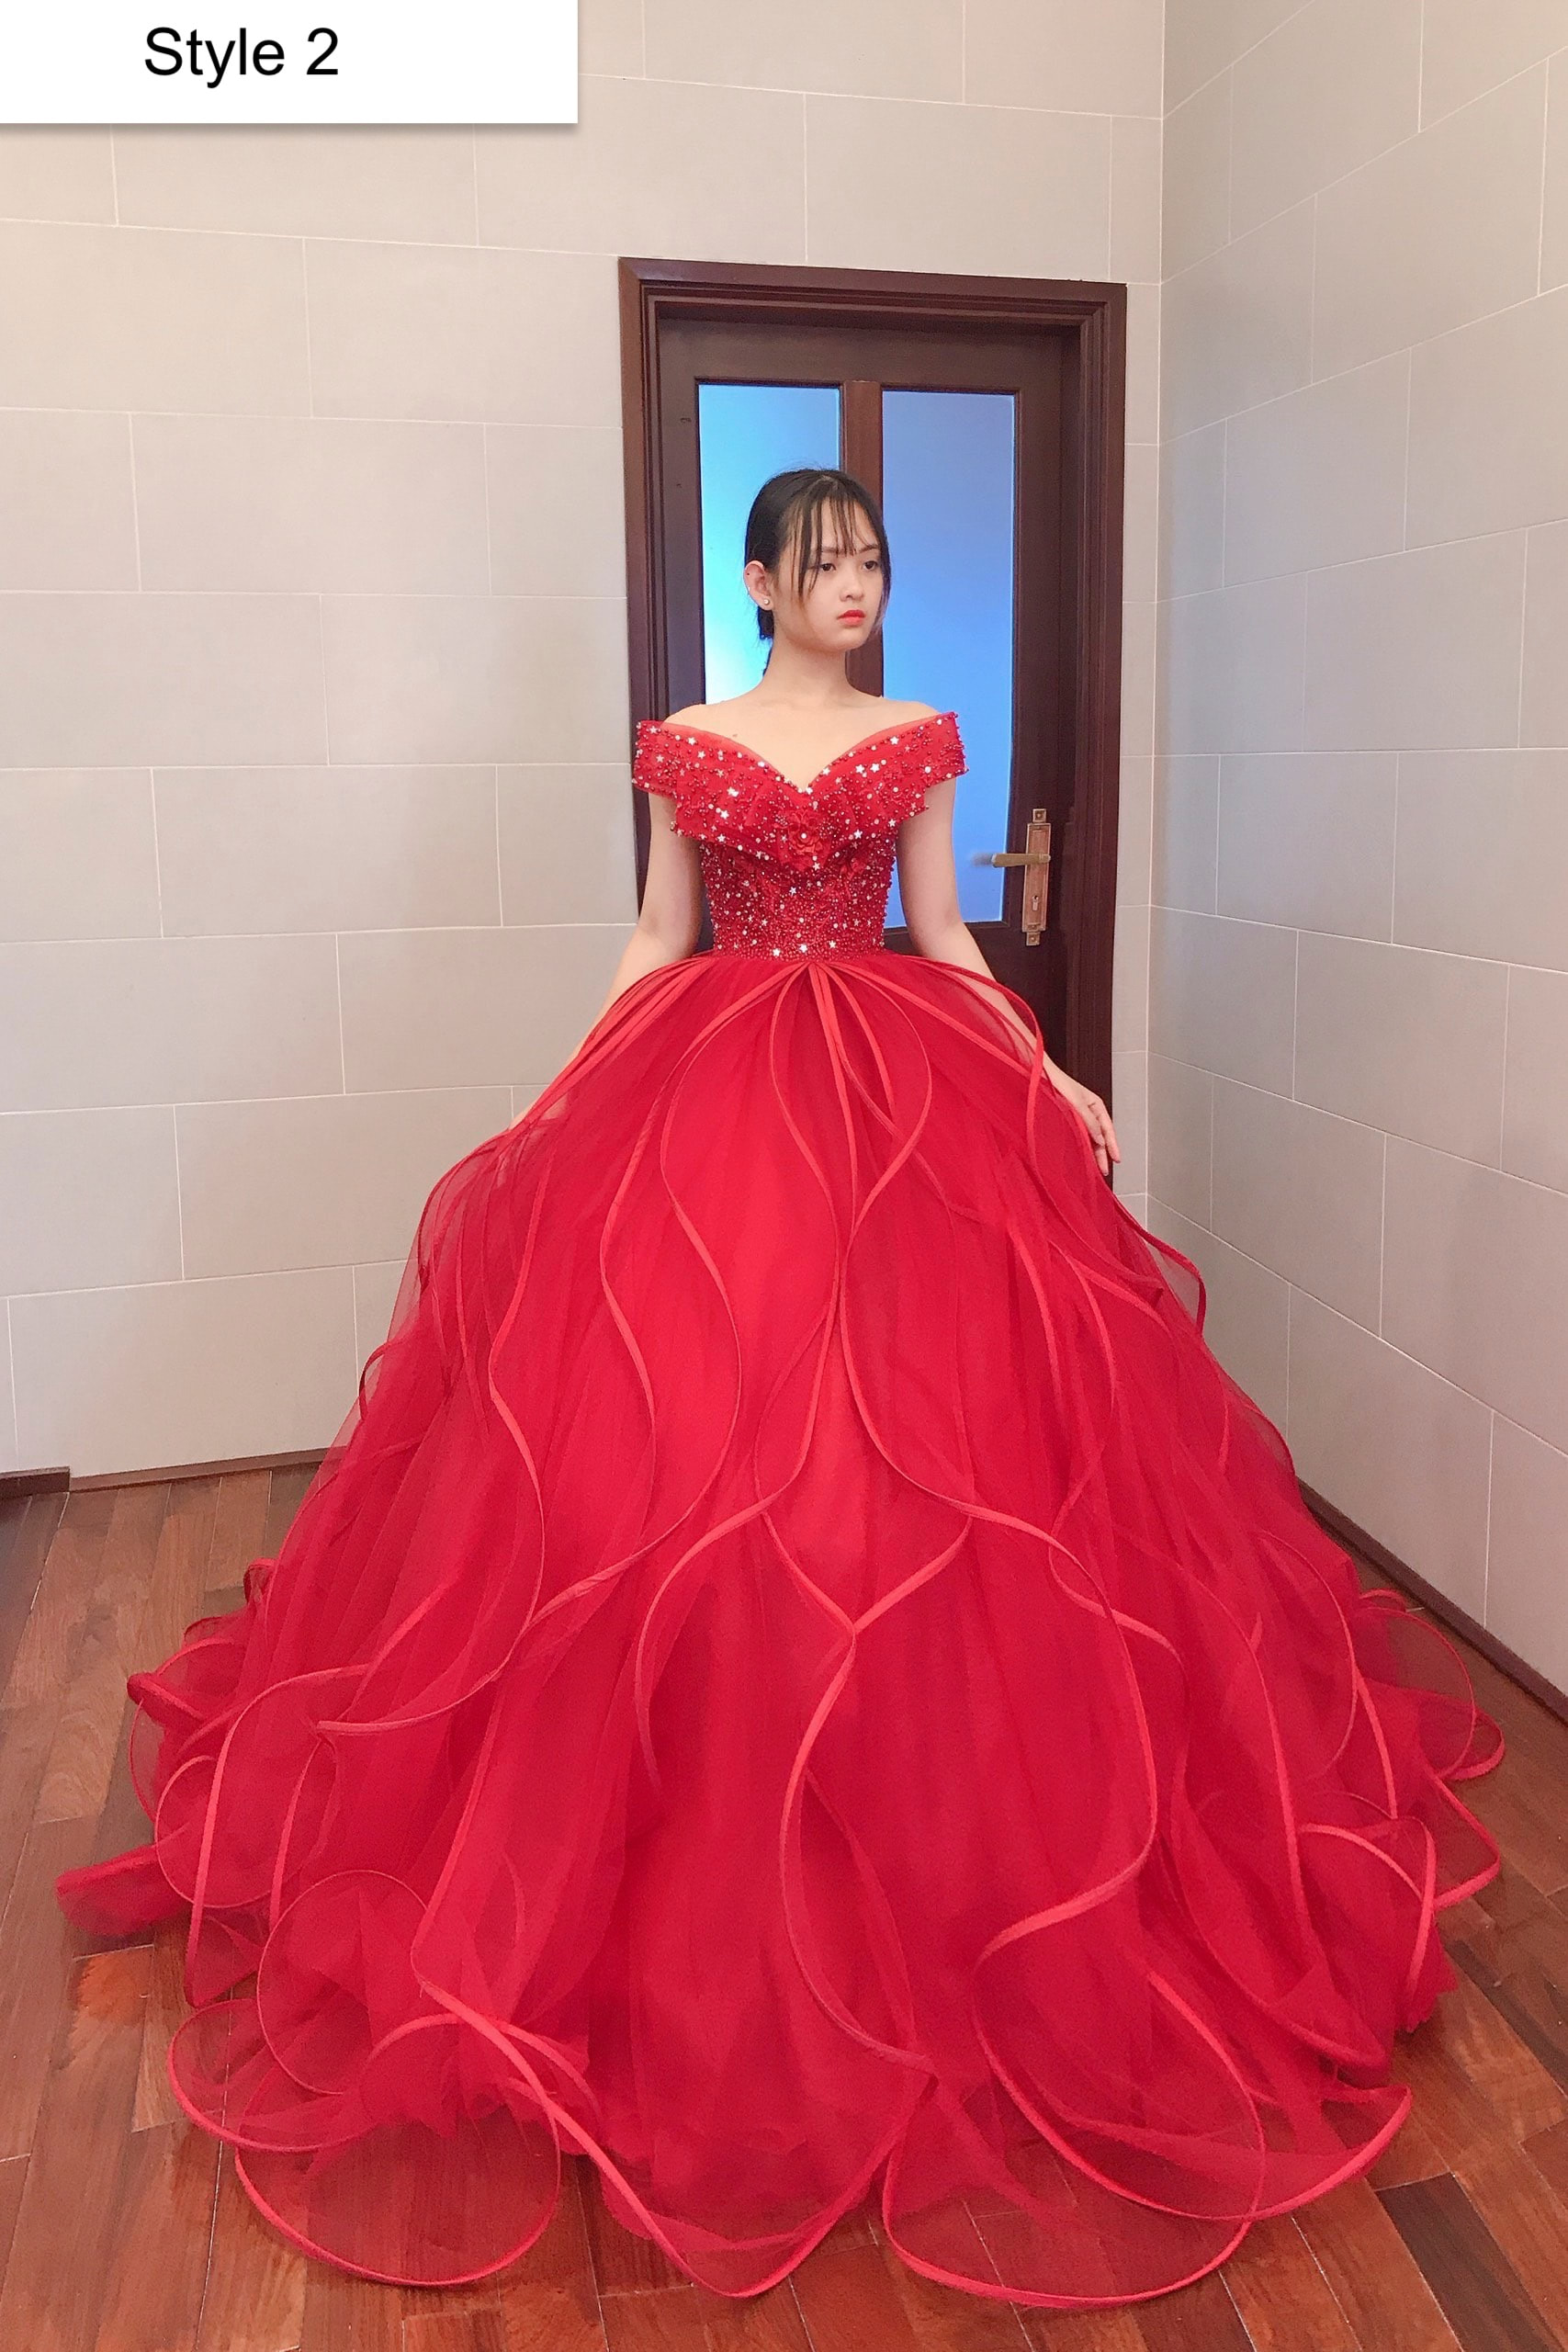 red princess ball gown